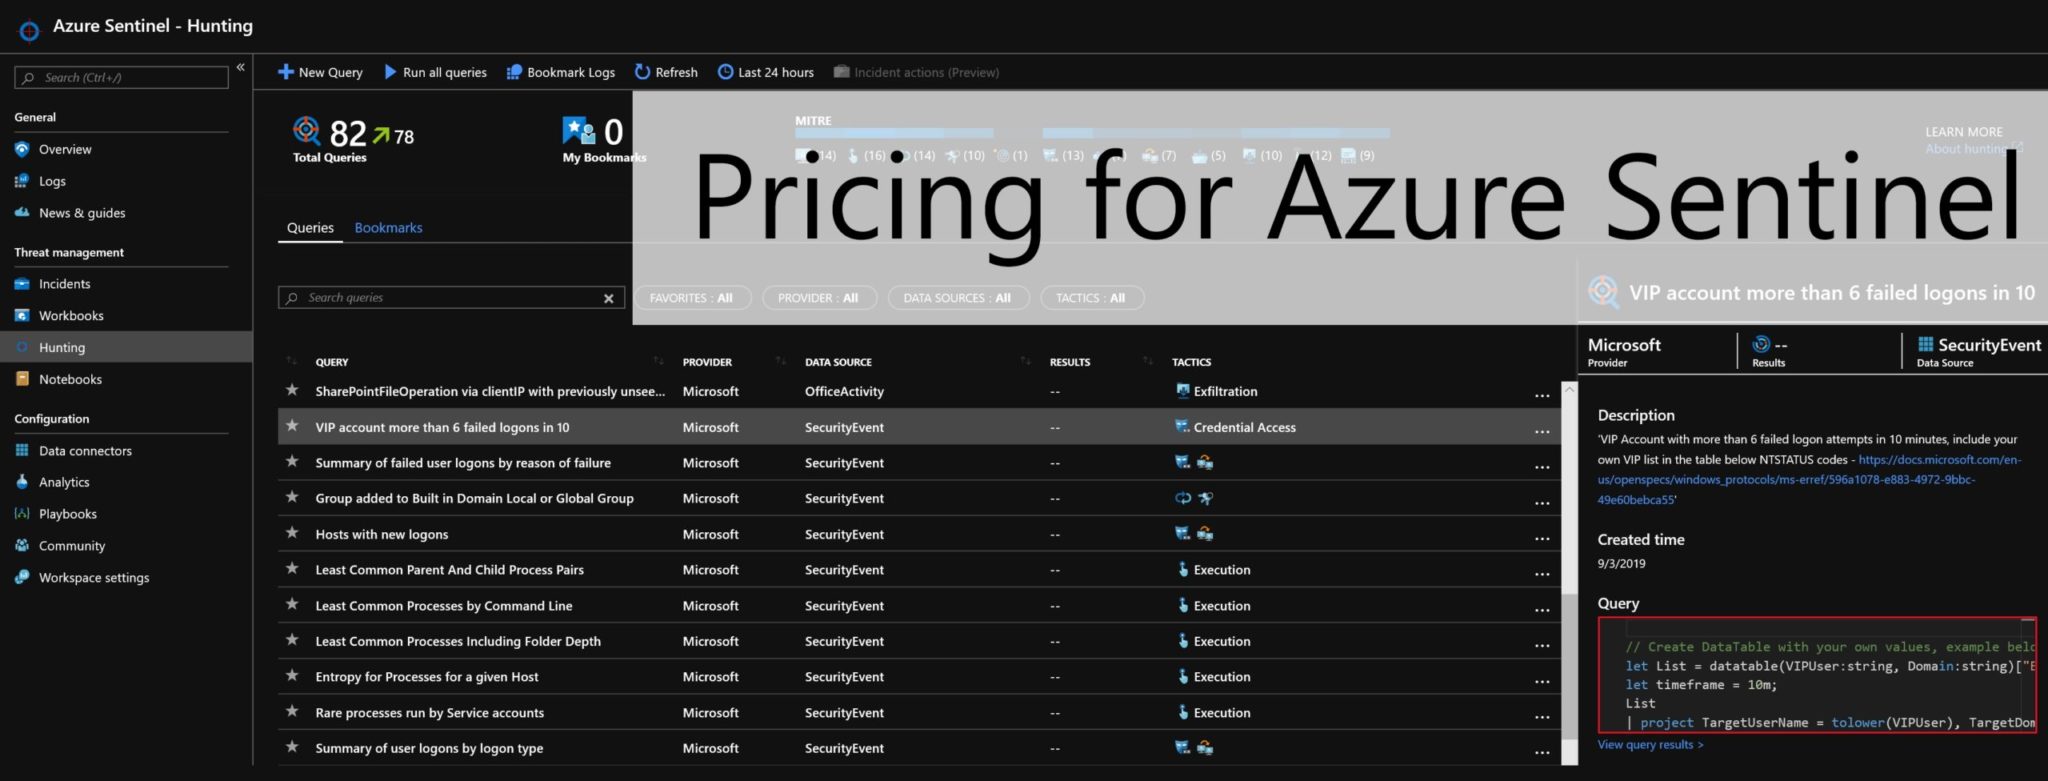 Pricing for Azure Sentinel is GA 13